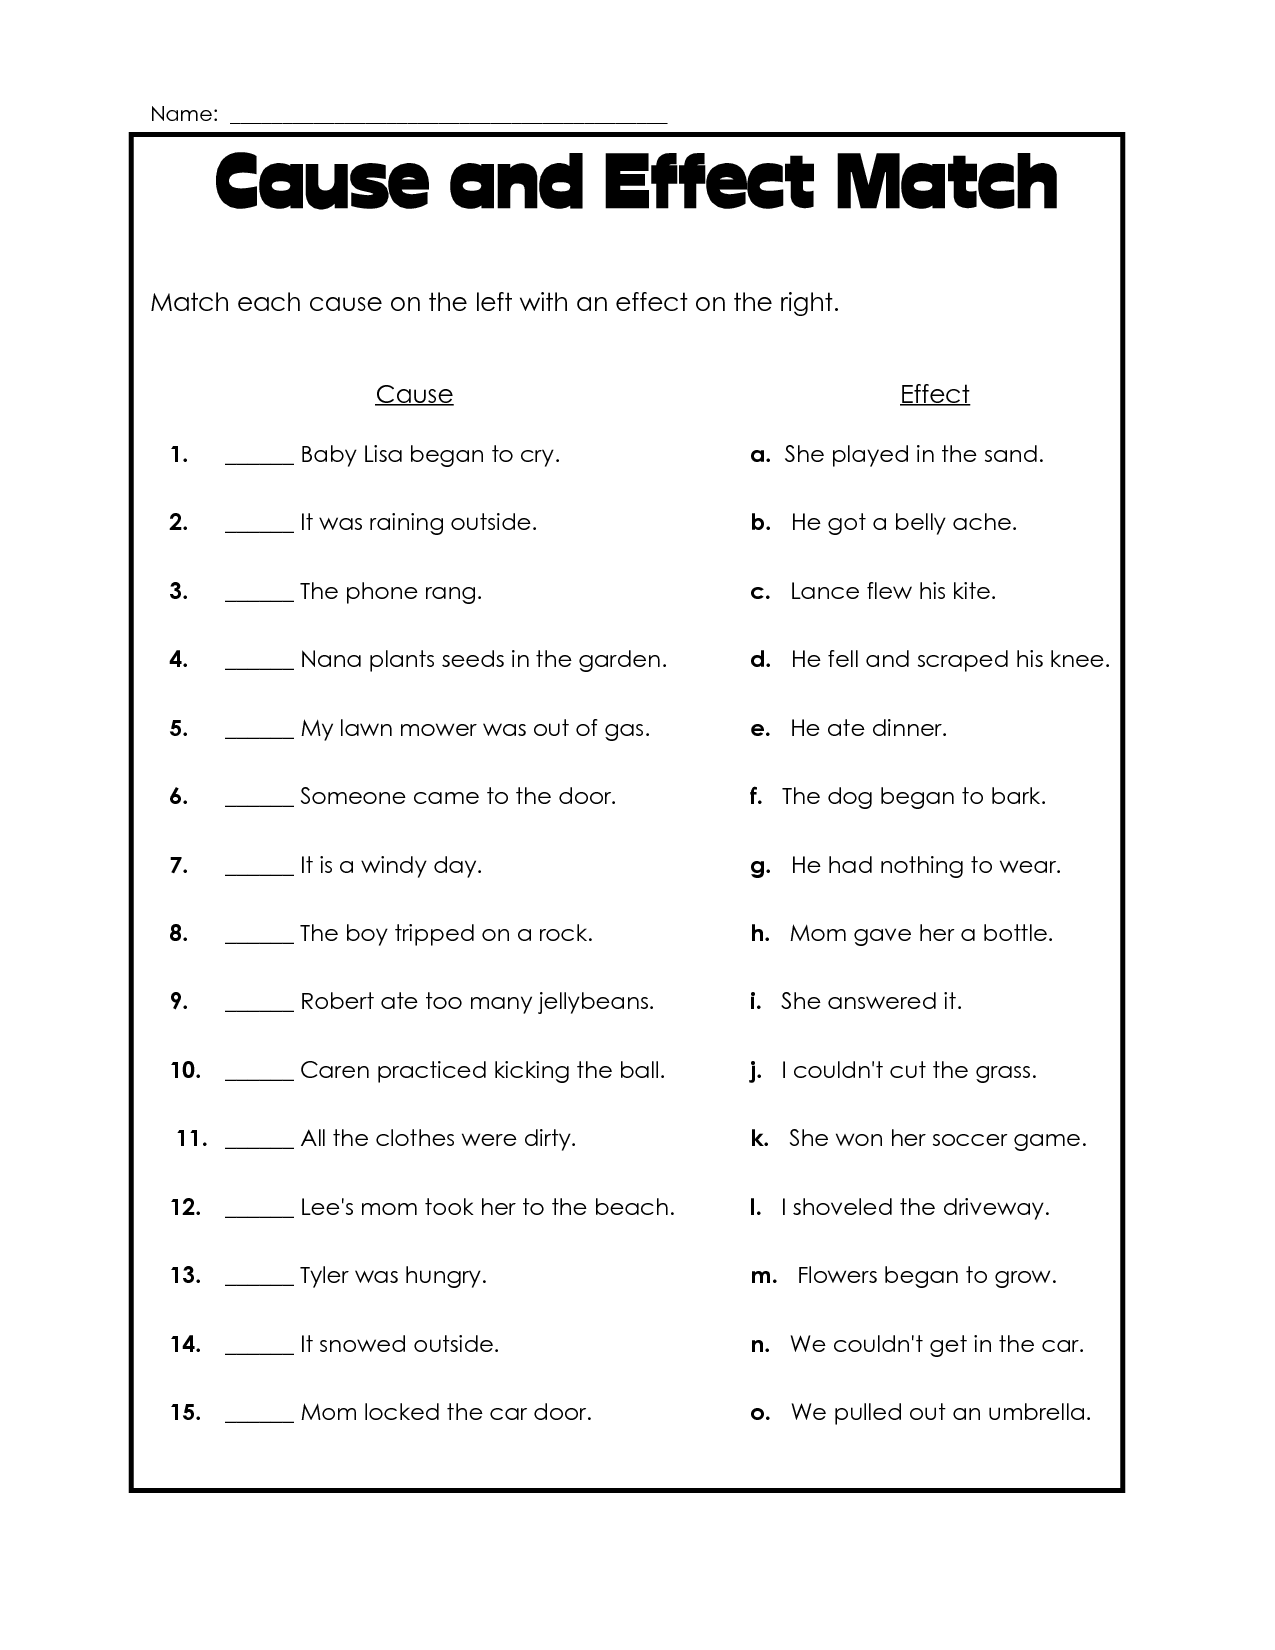 10-grade-4-reading-worksheets-image-rugby-rumilly